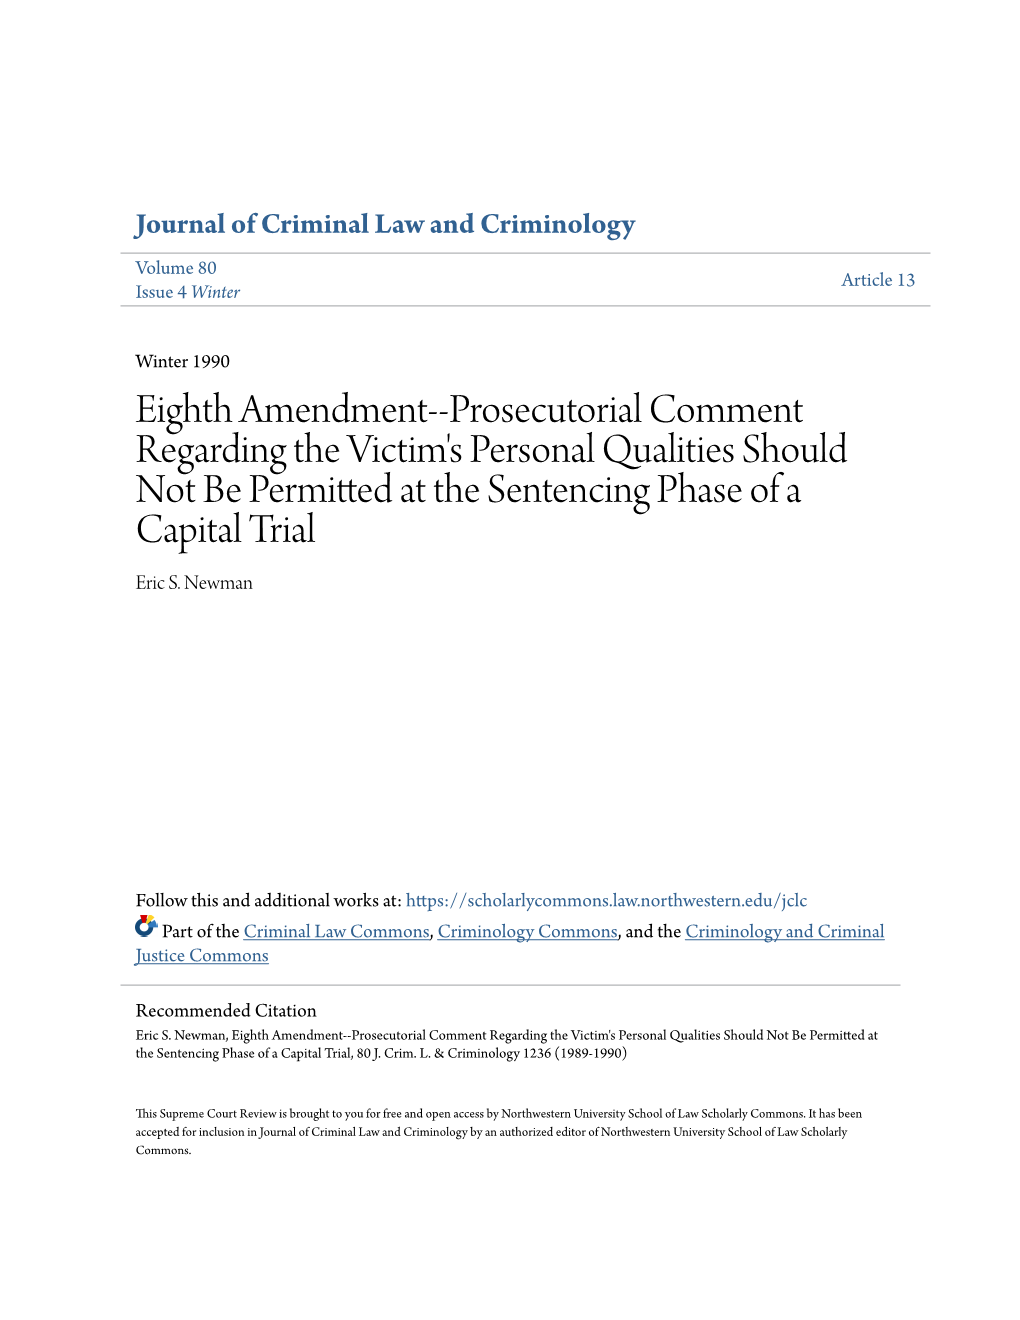 Eighth Amendment--Prosecutorial Comment Regarding the Victim's Personal Qualities Should Not Be Permitted at the Sentencing Phase of a Capital Trial Eric S